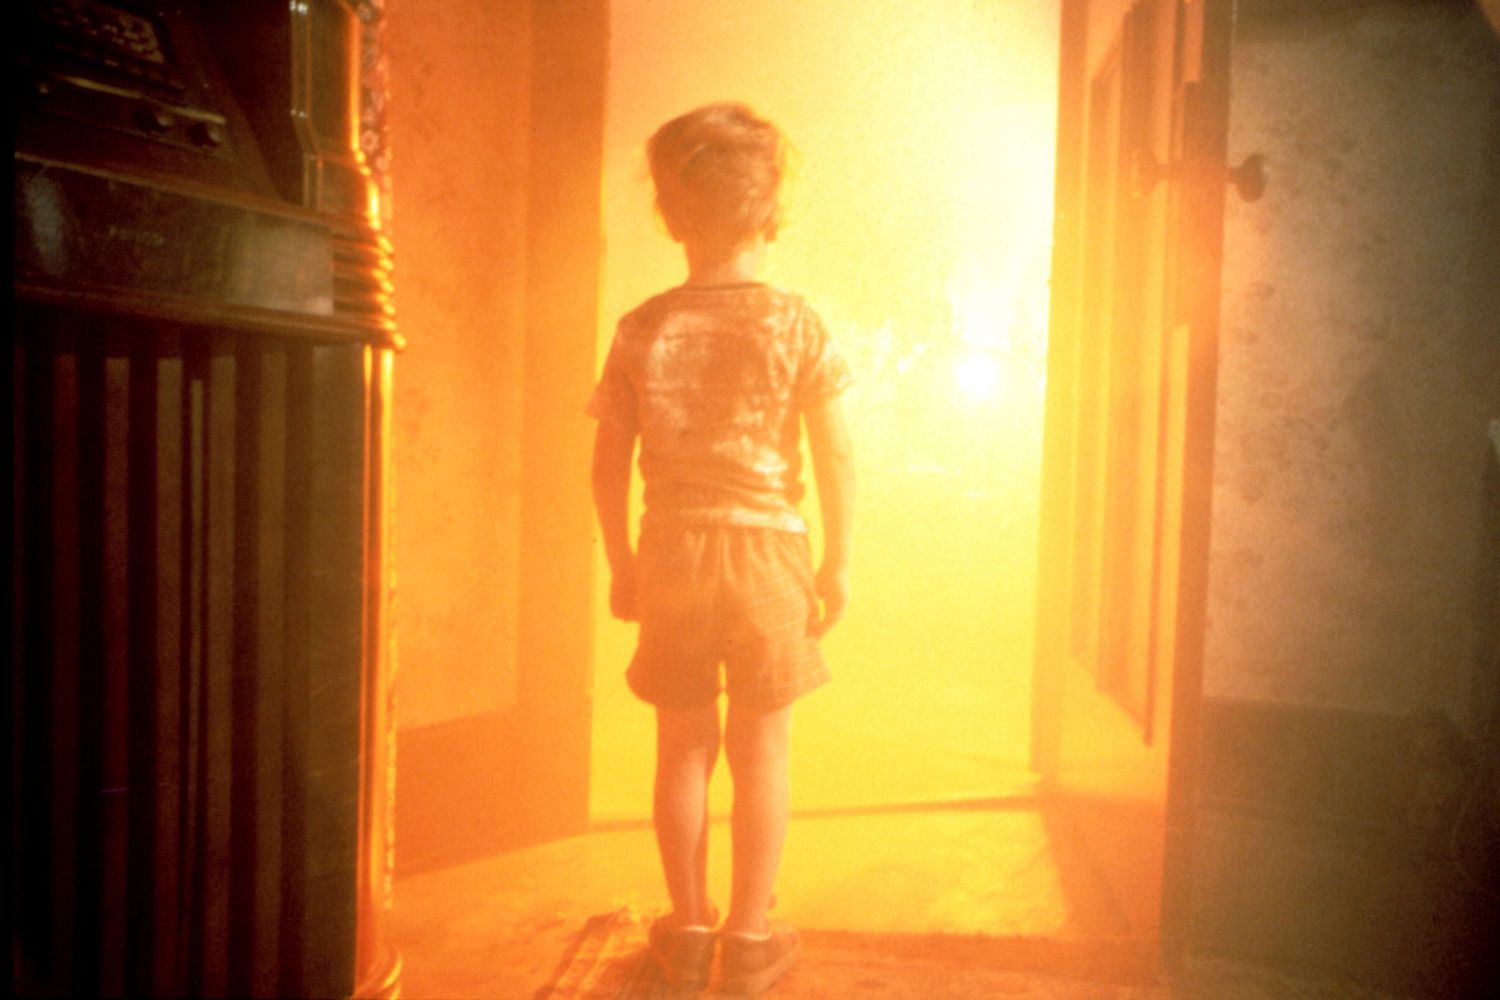 CLOSE ENCOUNTERS OF THE THIRD KIND, Cary Guffey, 1977. (c)Columbia Pictures. Courtesy: Everett Colle